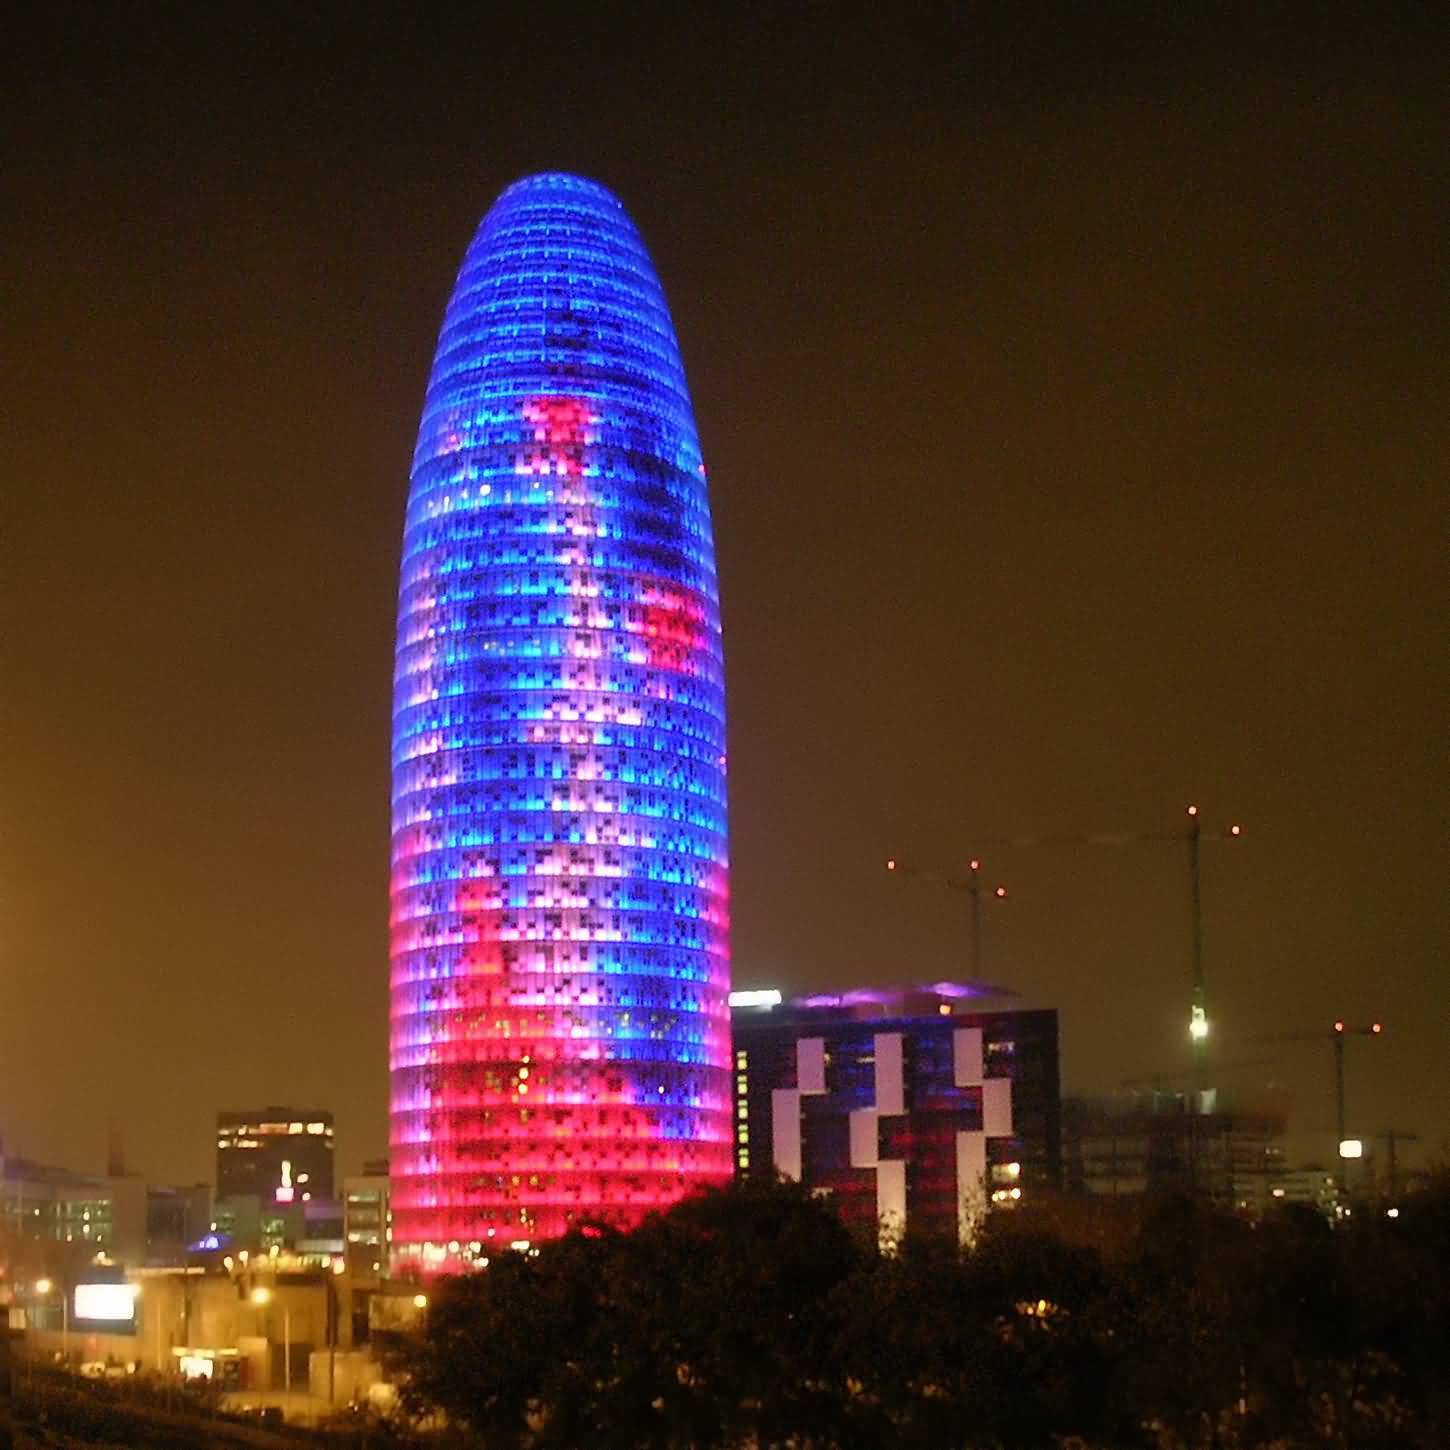 Torre Agbar Looks Amazing With Blue And Pink Lights